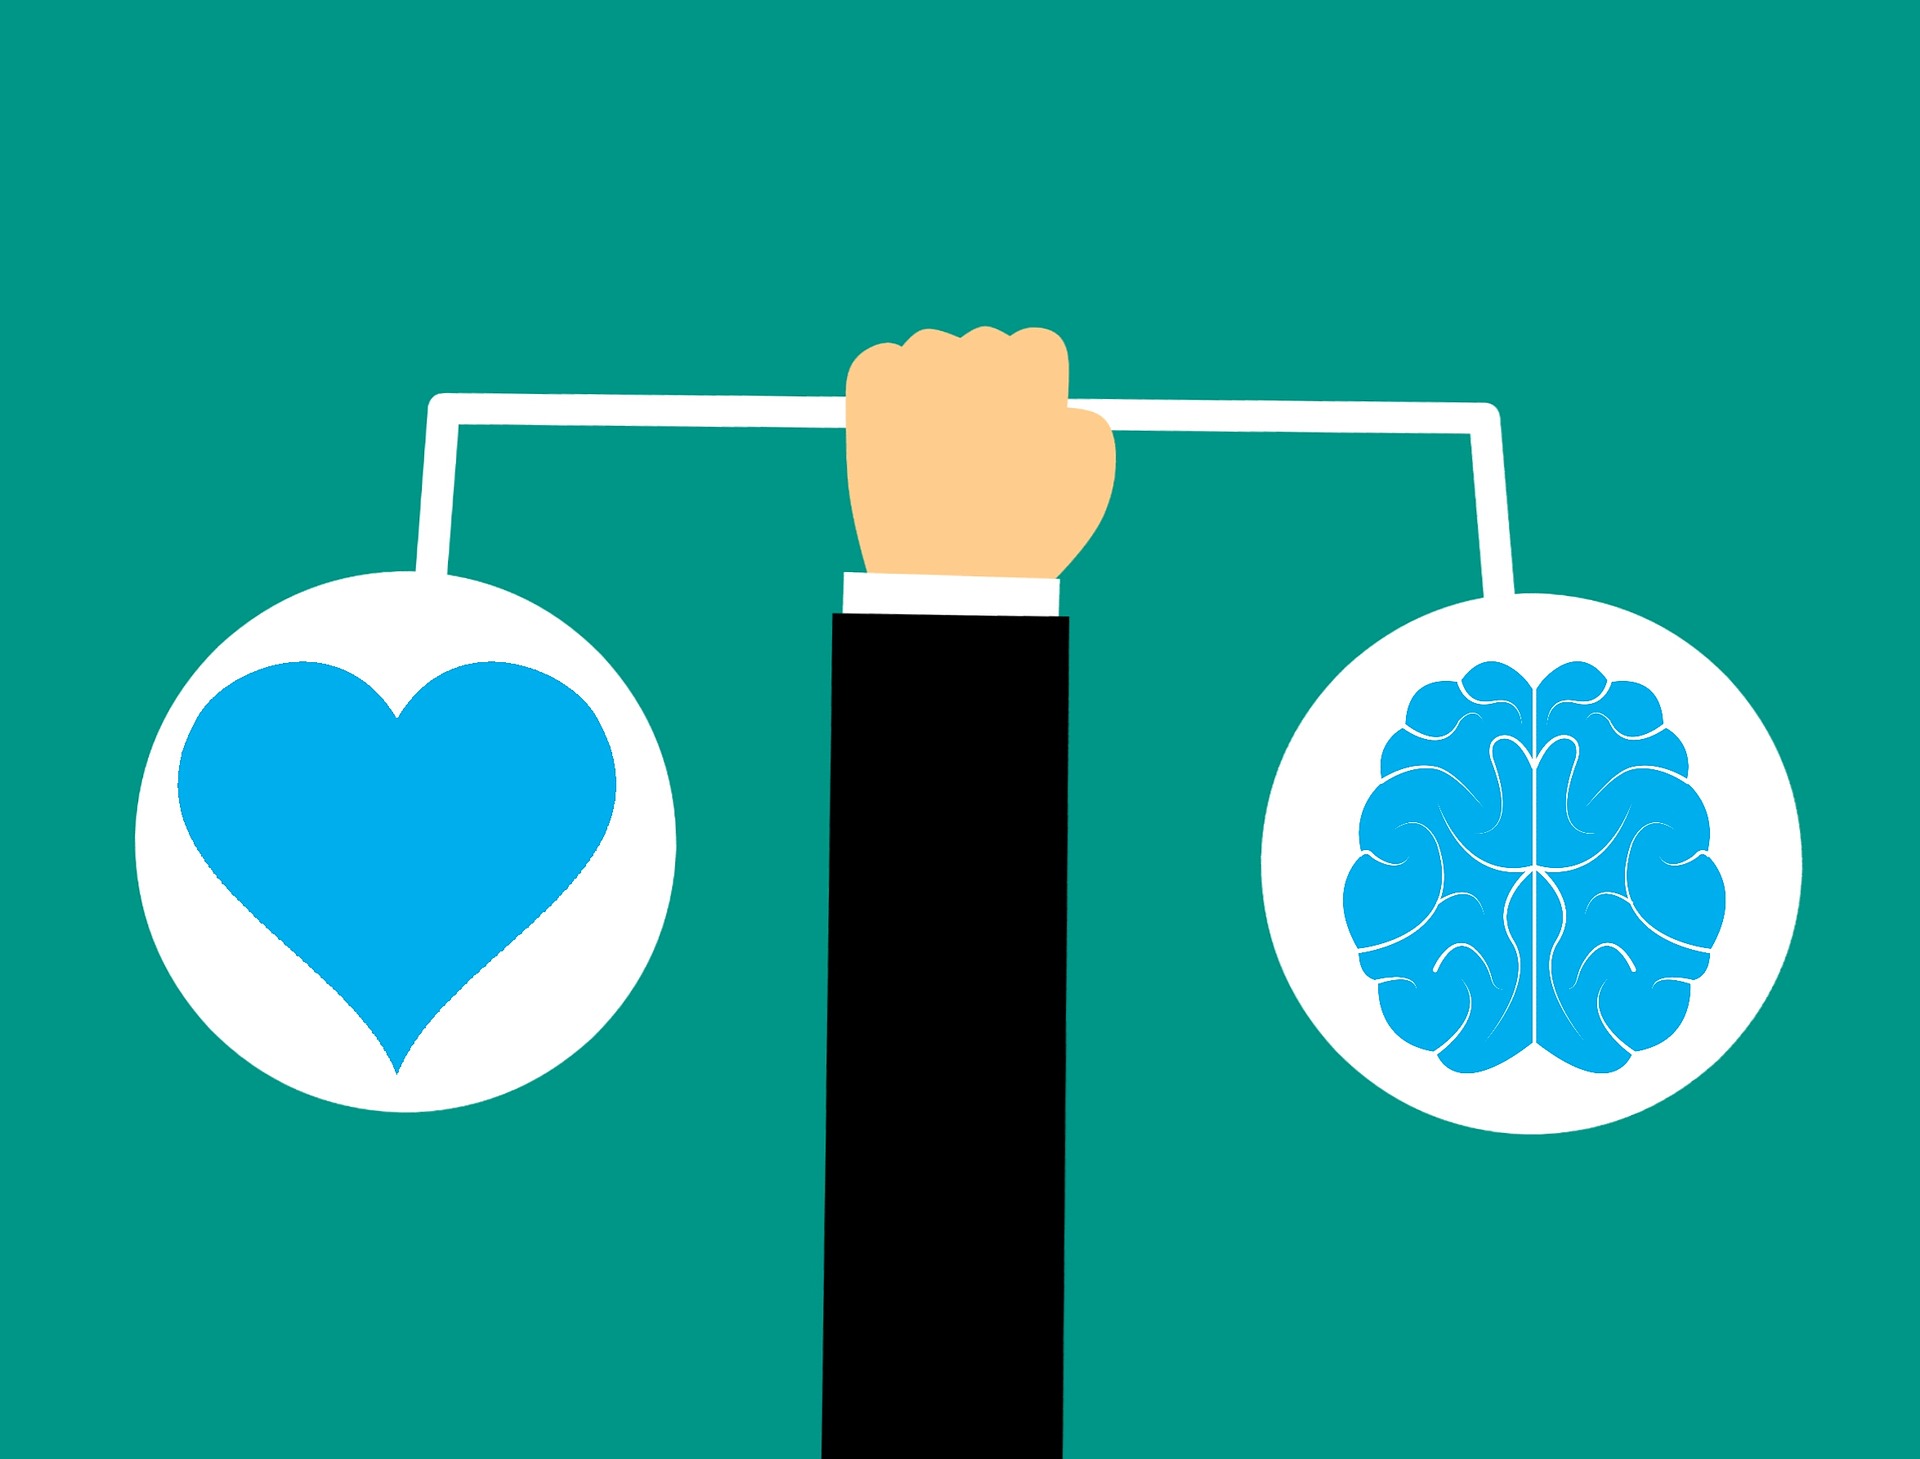 Illustration of an arm balancing a heart and a brain, symbolizing emotional intelligence